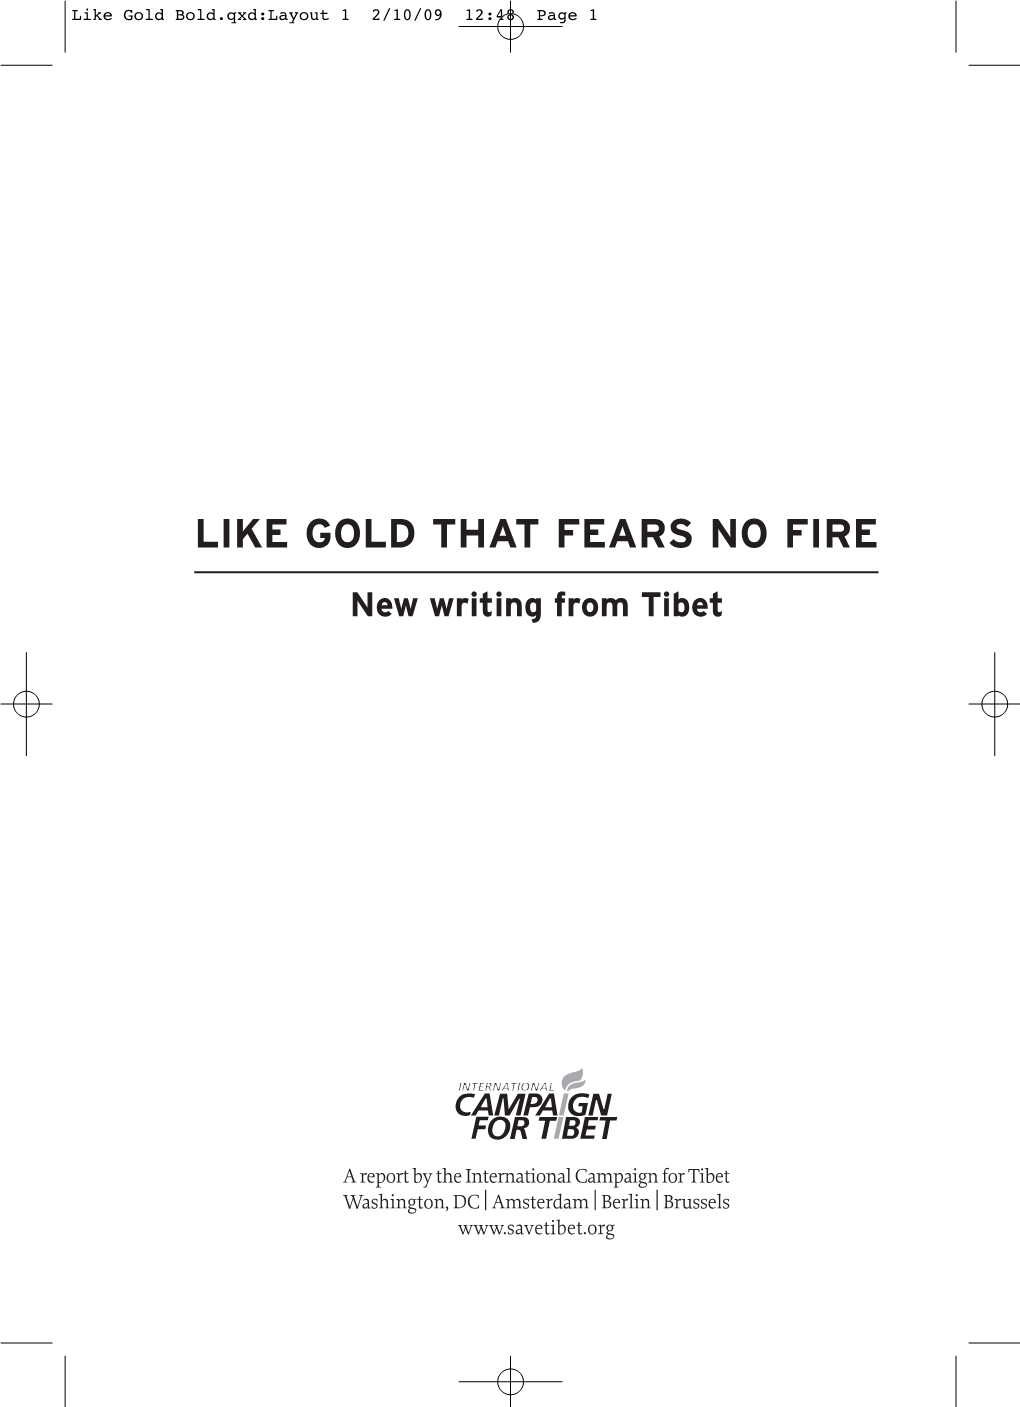 LIKE GOLD THAT FEARS NO FIRE New Writing from Tibet